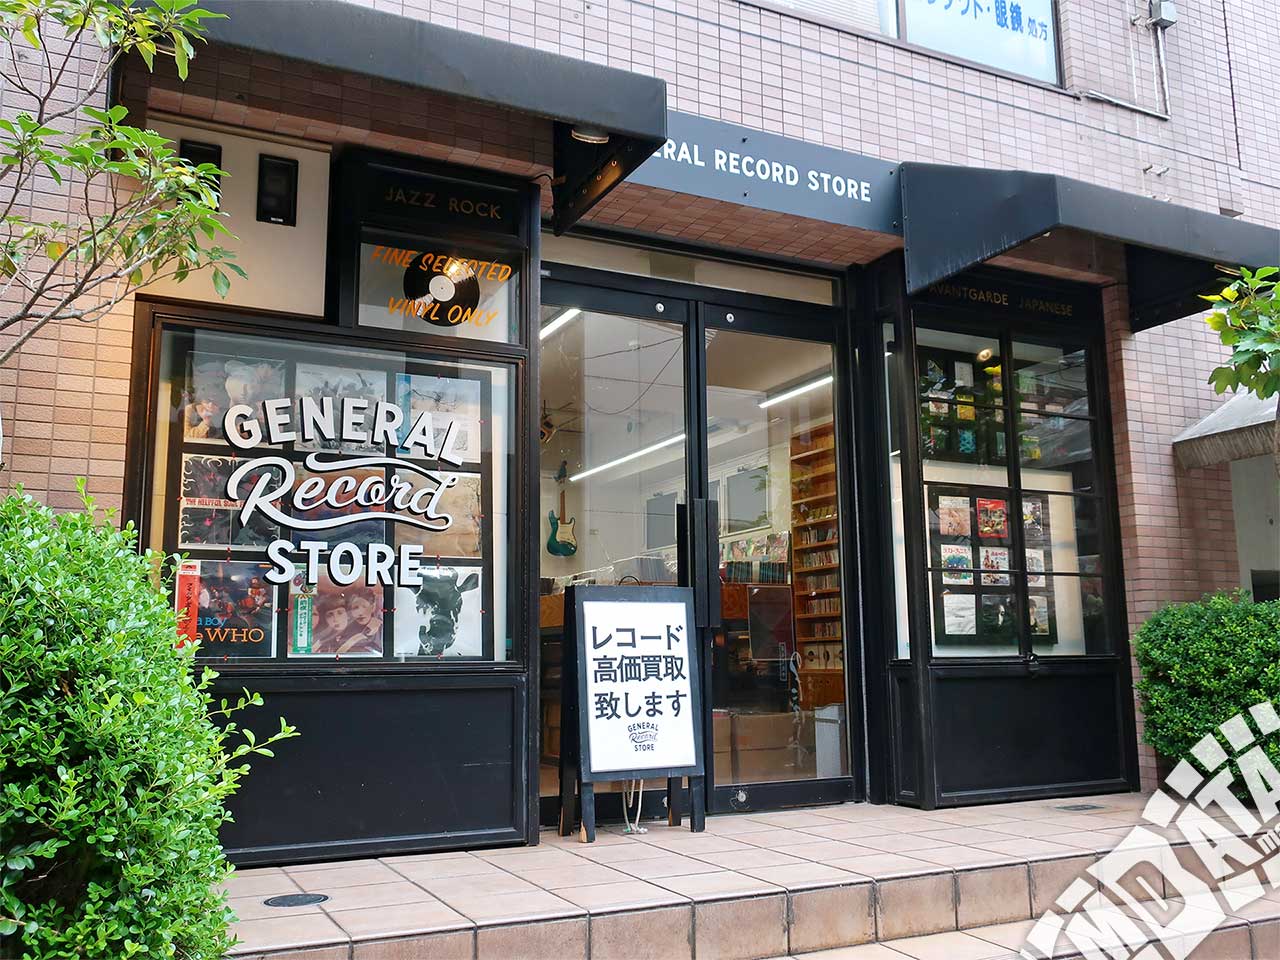 General Record Storeの写真 撮影日:2019/7/23 Photo taken on 2019/07/23